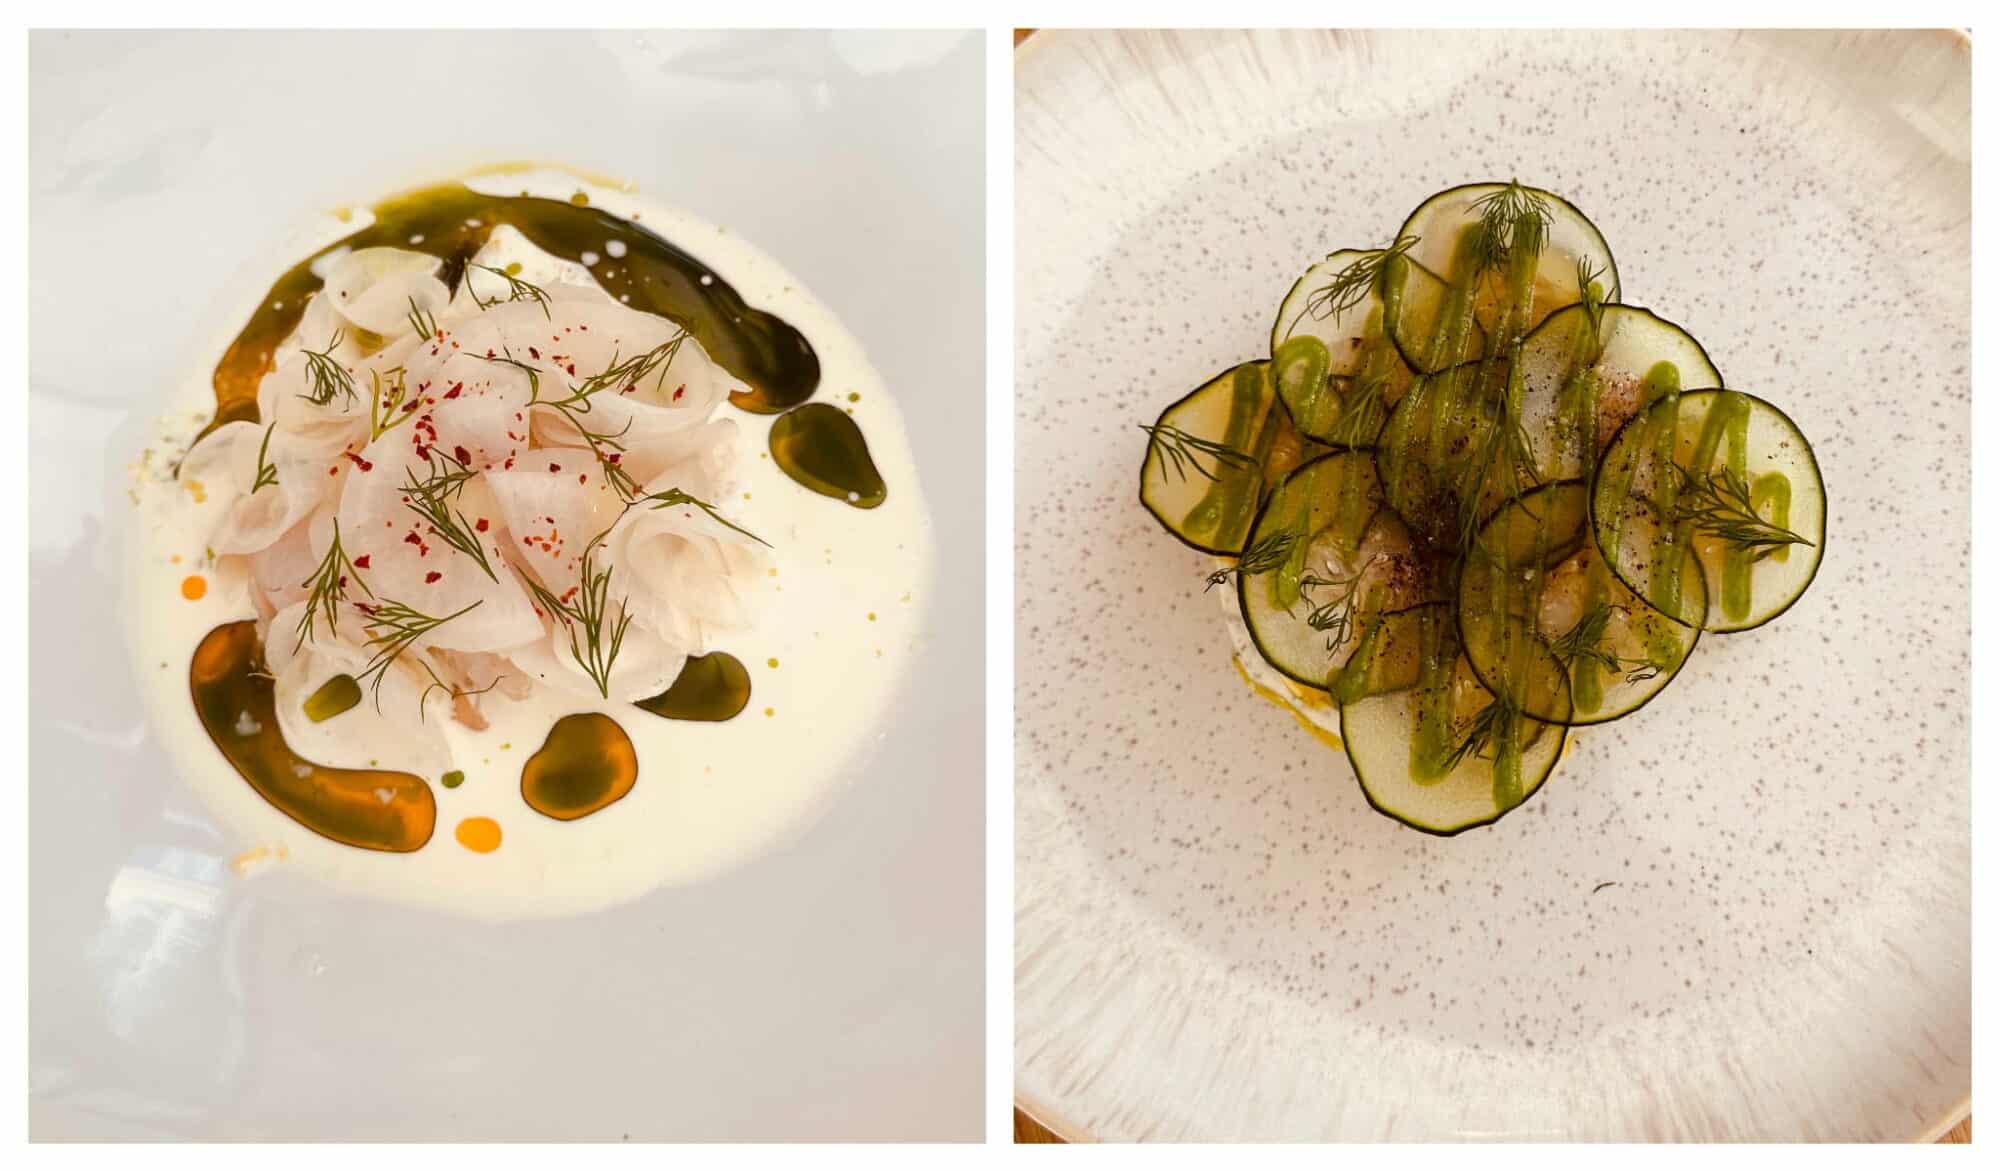 Left: Gravadlax made from a white fish served on a bed of cream and green herbed oil drizzled around; right: a fish appetizer in the shape of a square with thinly sliced cucumbers and dill neatly decorating the top.